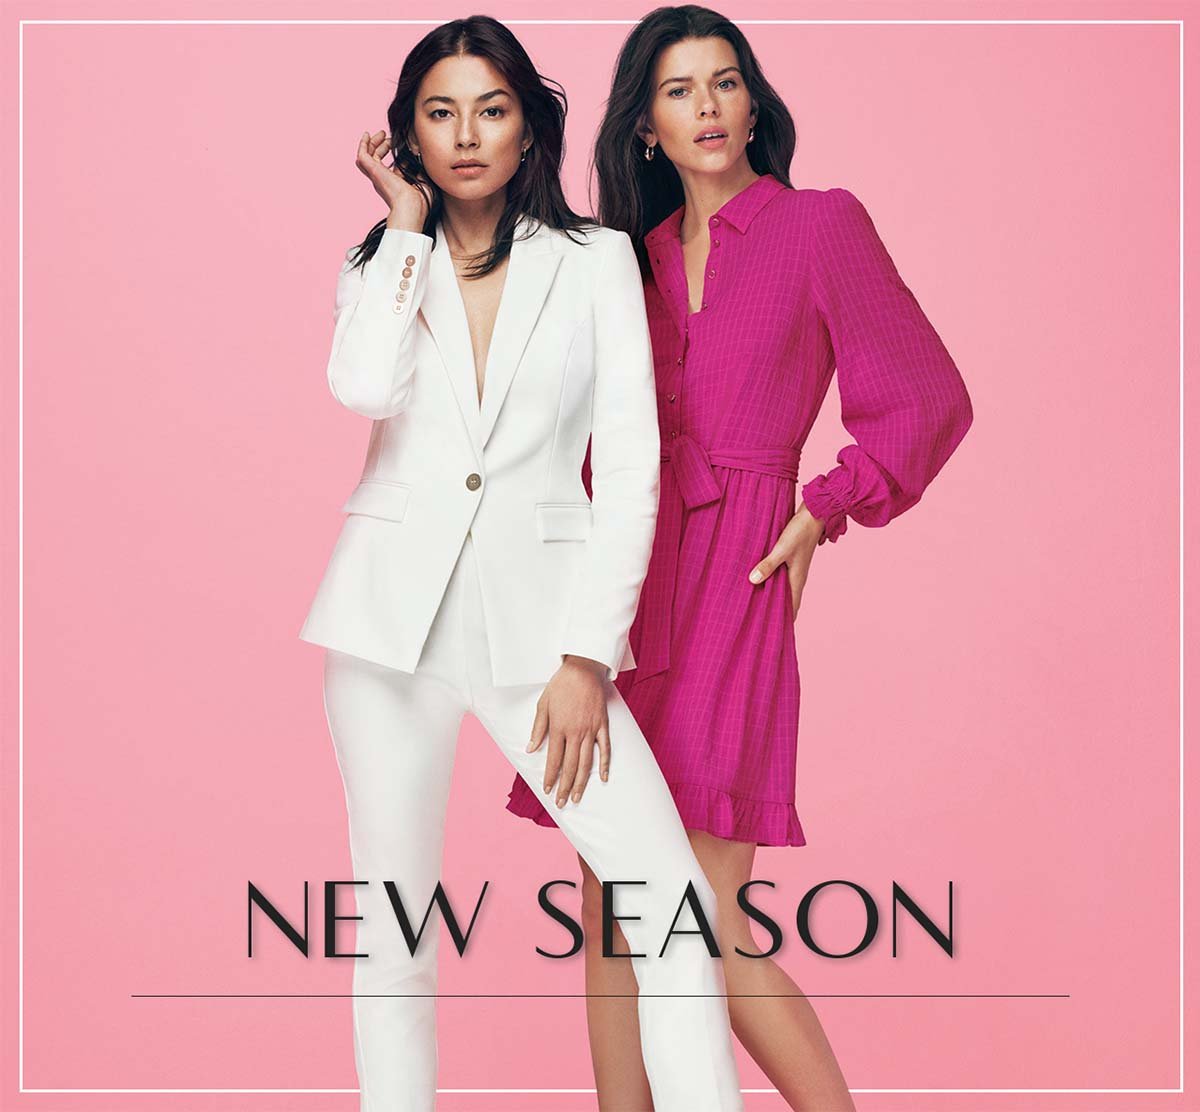 New Season. 30% Off All full price Tops & Dresses. 400+ Styles. Free Delivery $175+